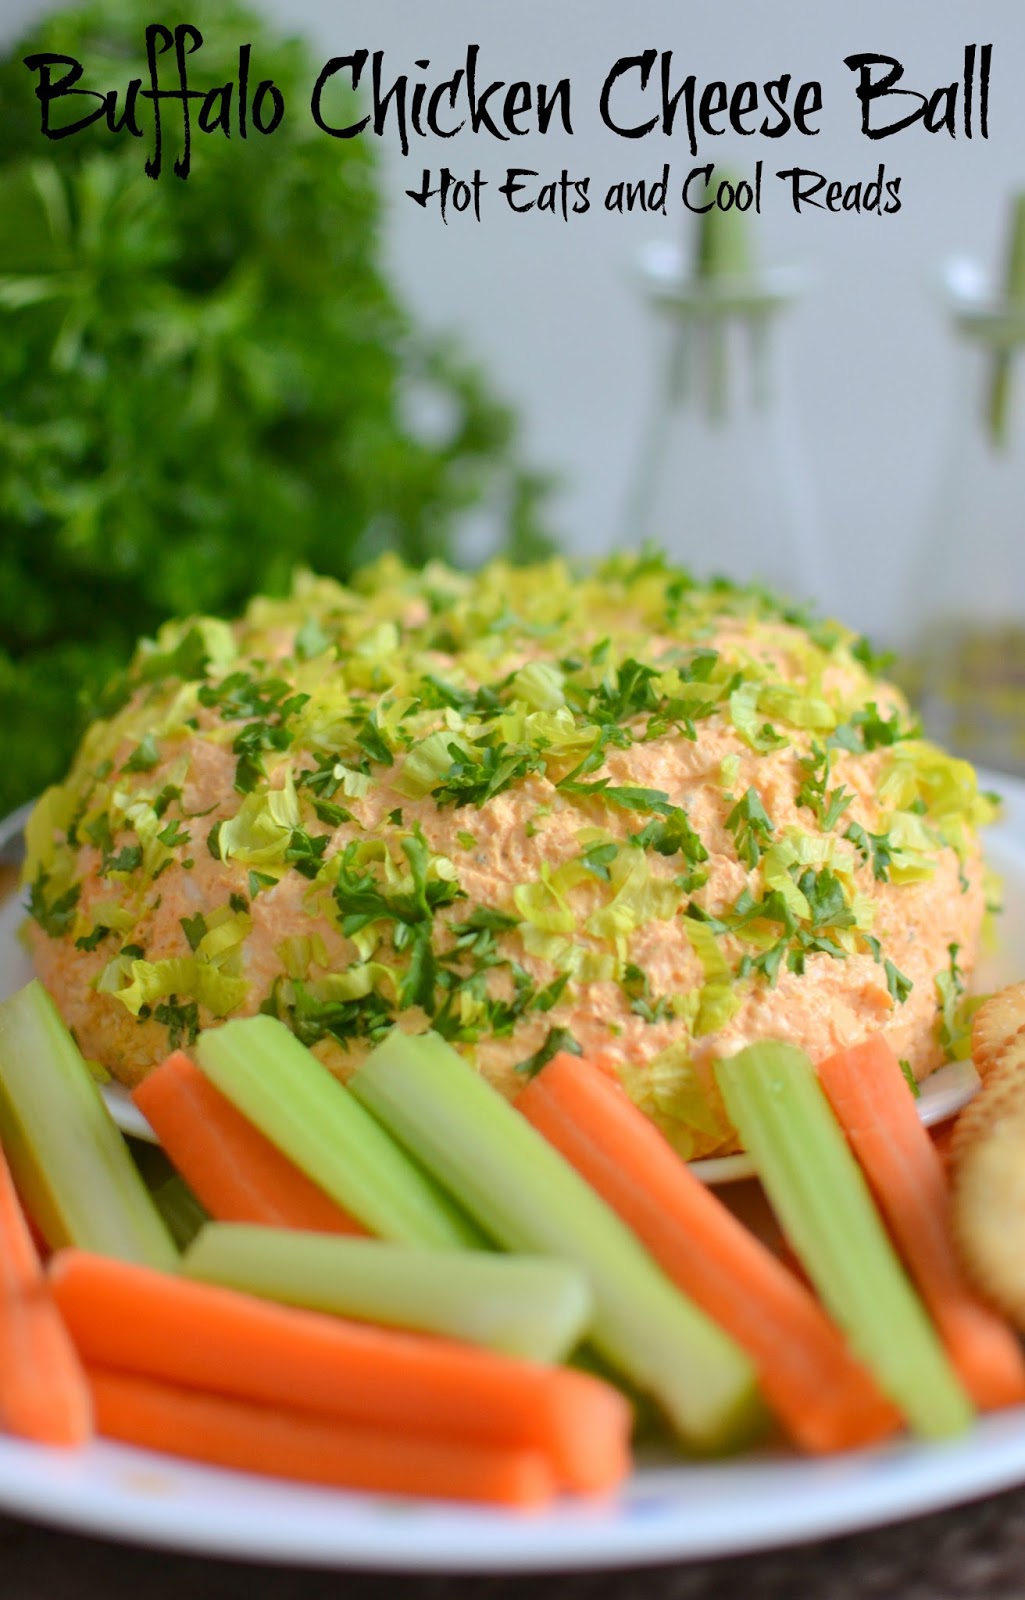 Hot and Cool Reads: Buffalo Chicken Cheese Ball Recipe